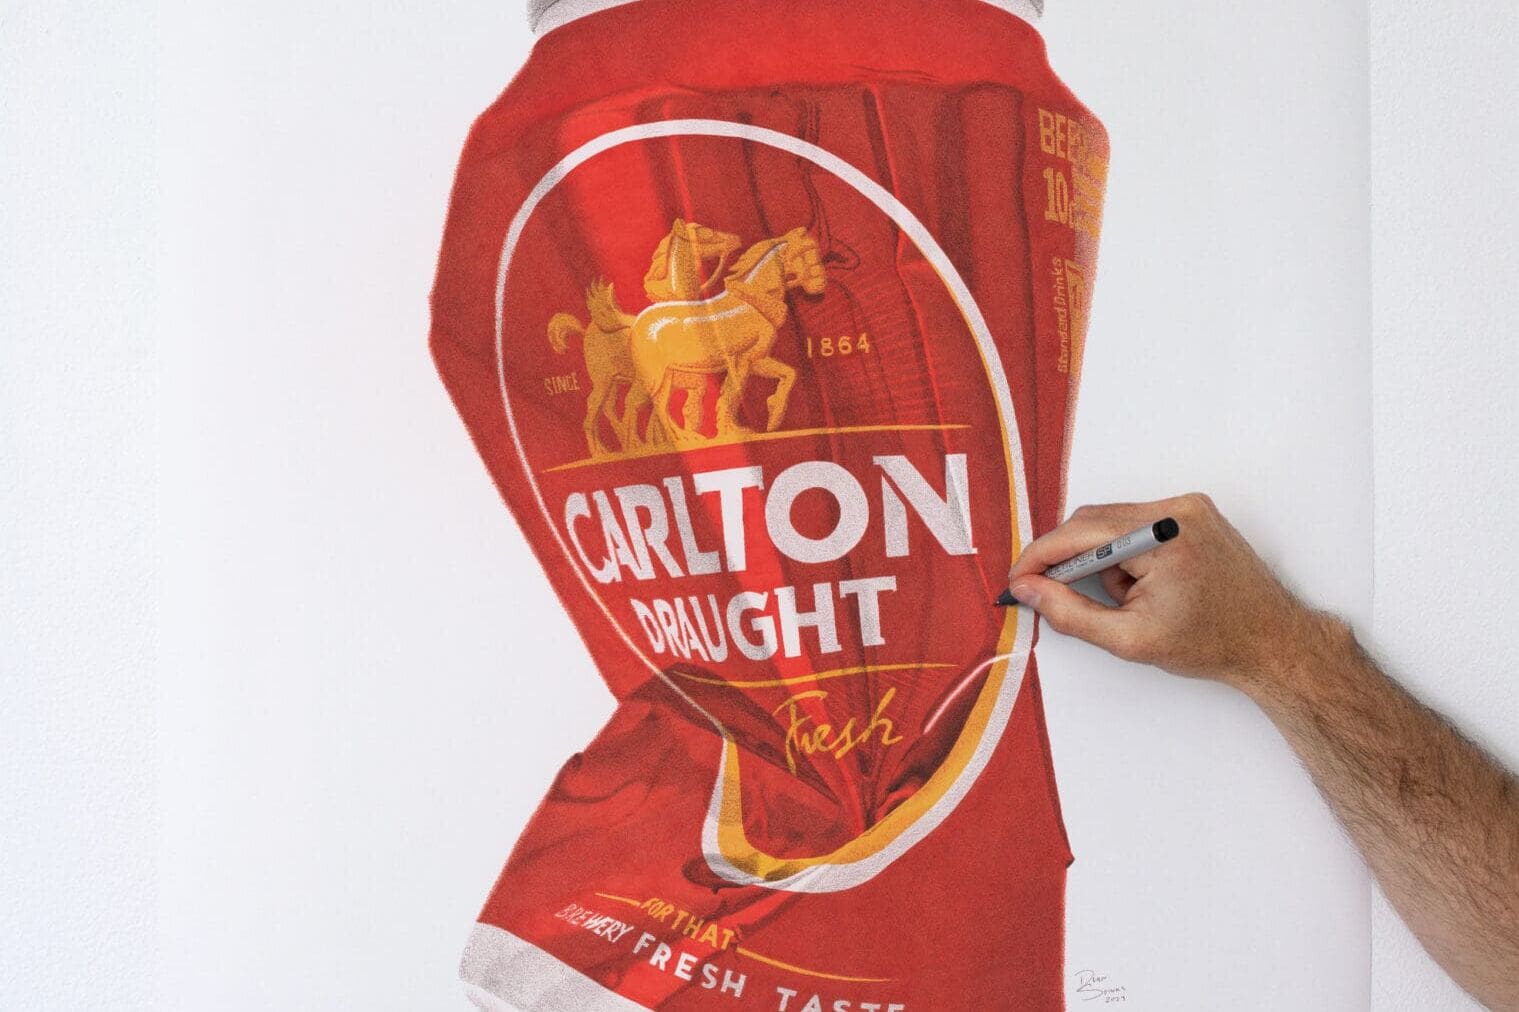 Hand drawn Carlton Draught beer can artwork with Copic Marker